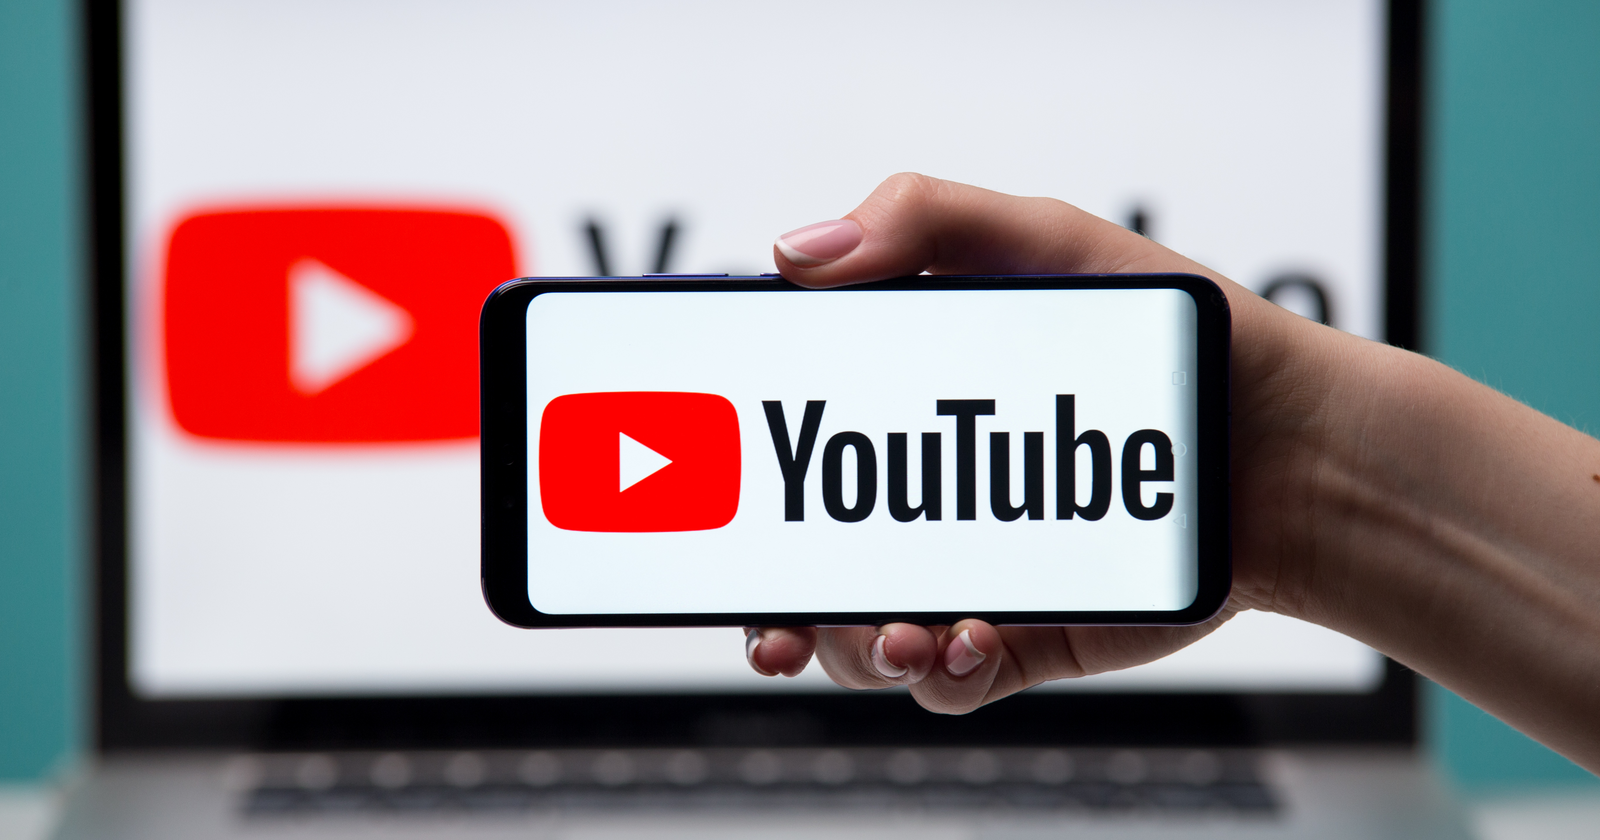 New Study Shows Which Keywords on YouTube Get the Most Video Views